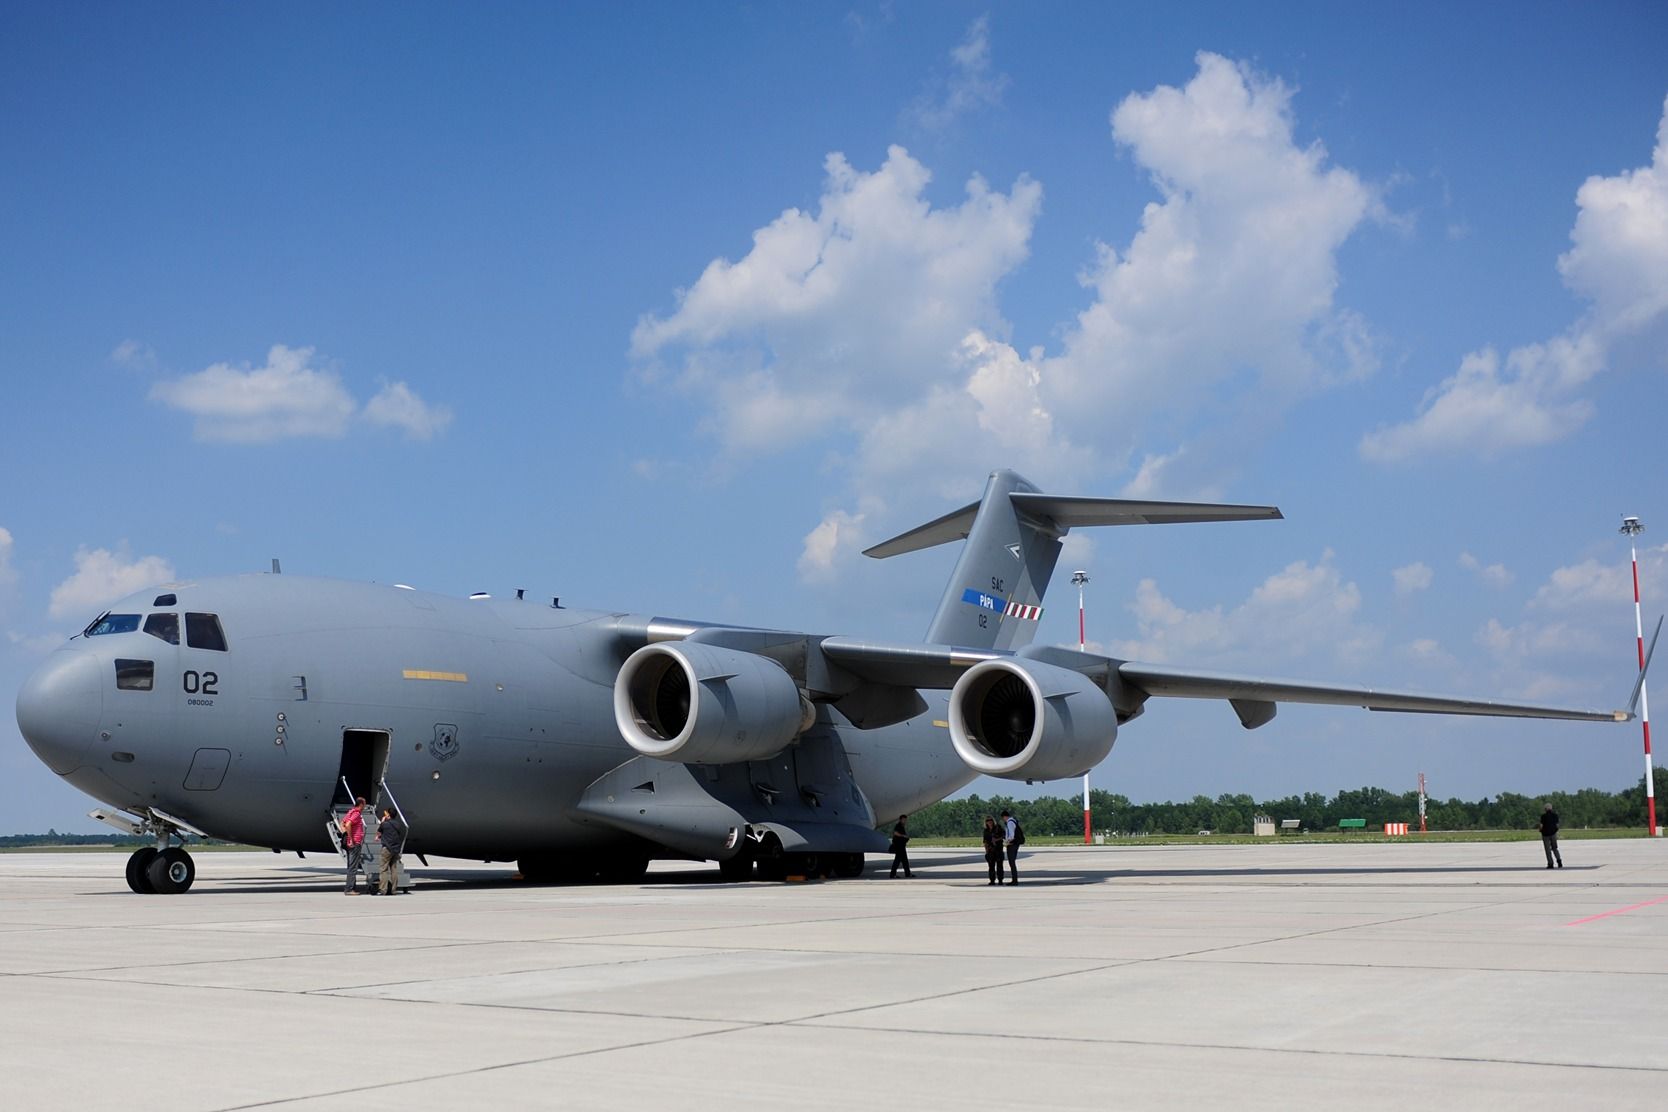 A Boeing C-17 Globemaster parked on an airport apron.